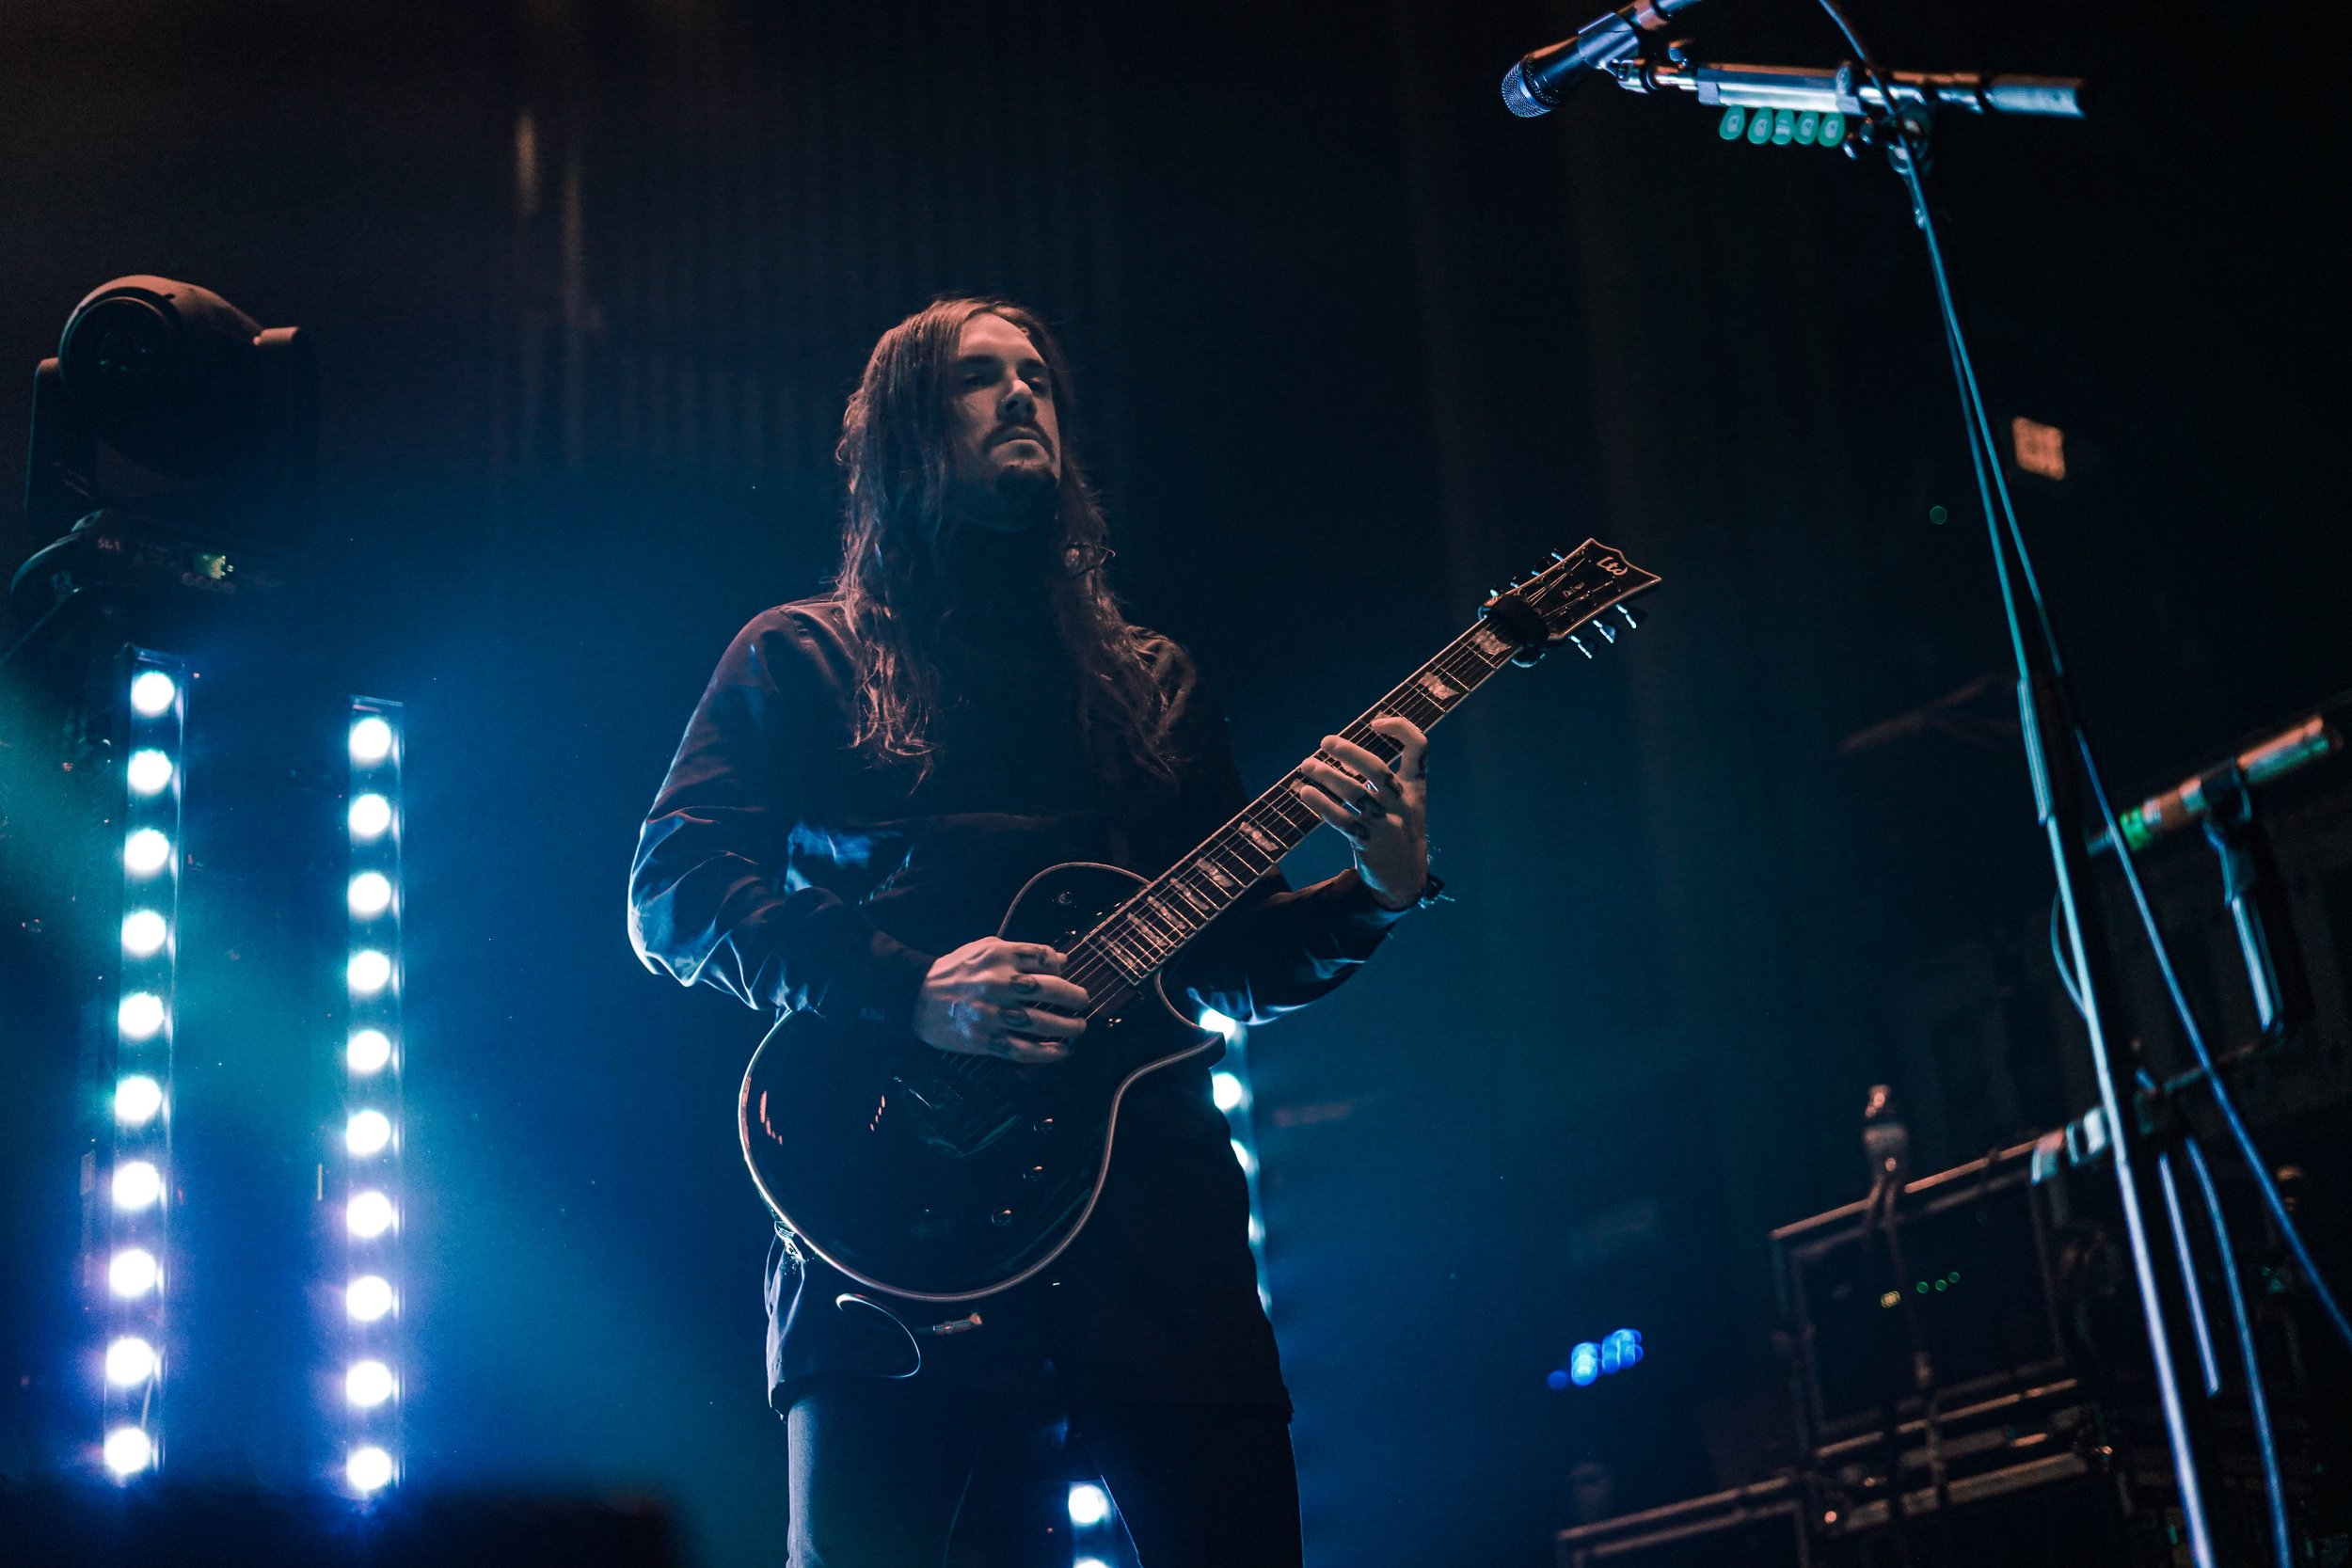 Bad Omens at The Tabernacle